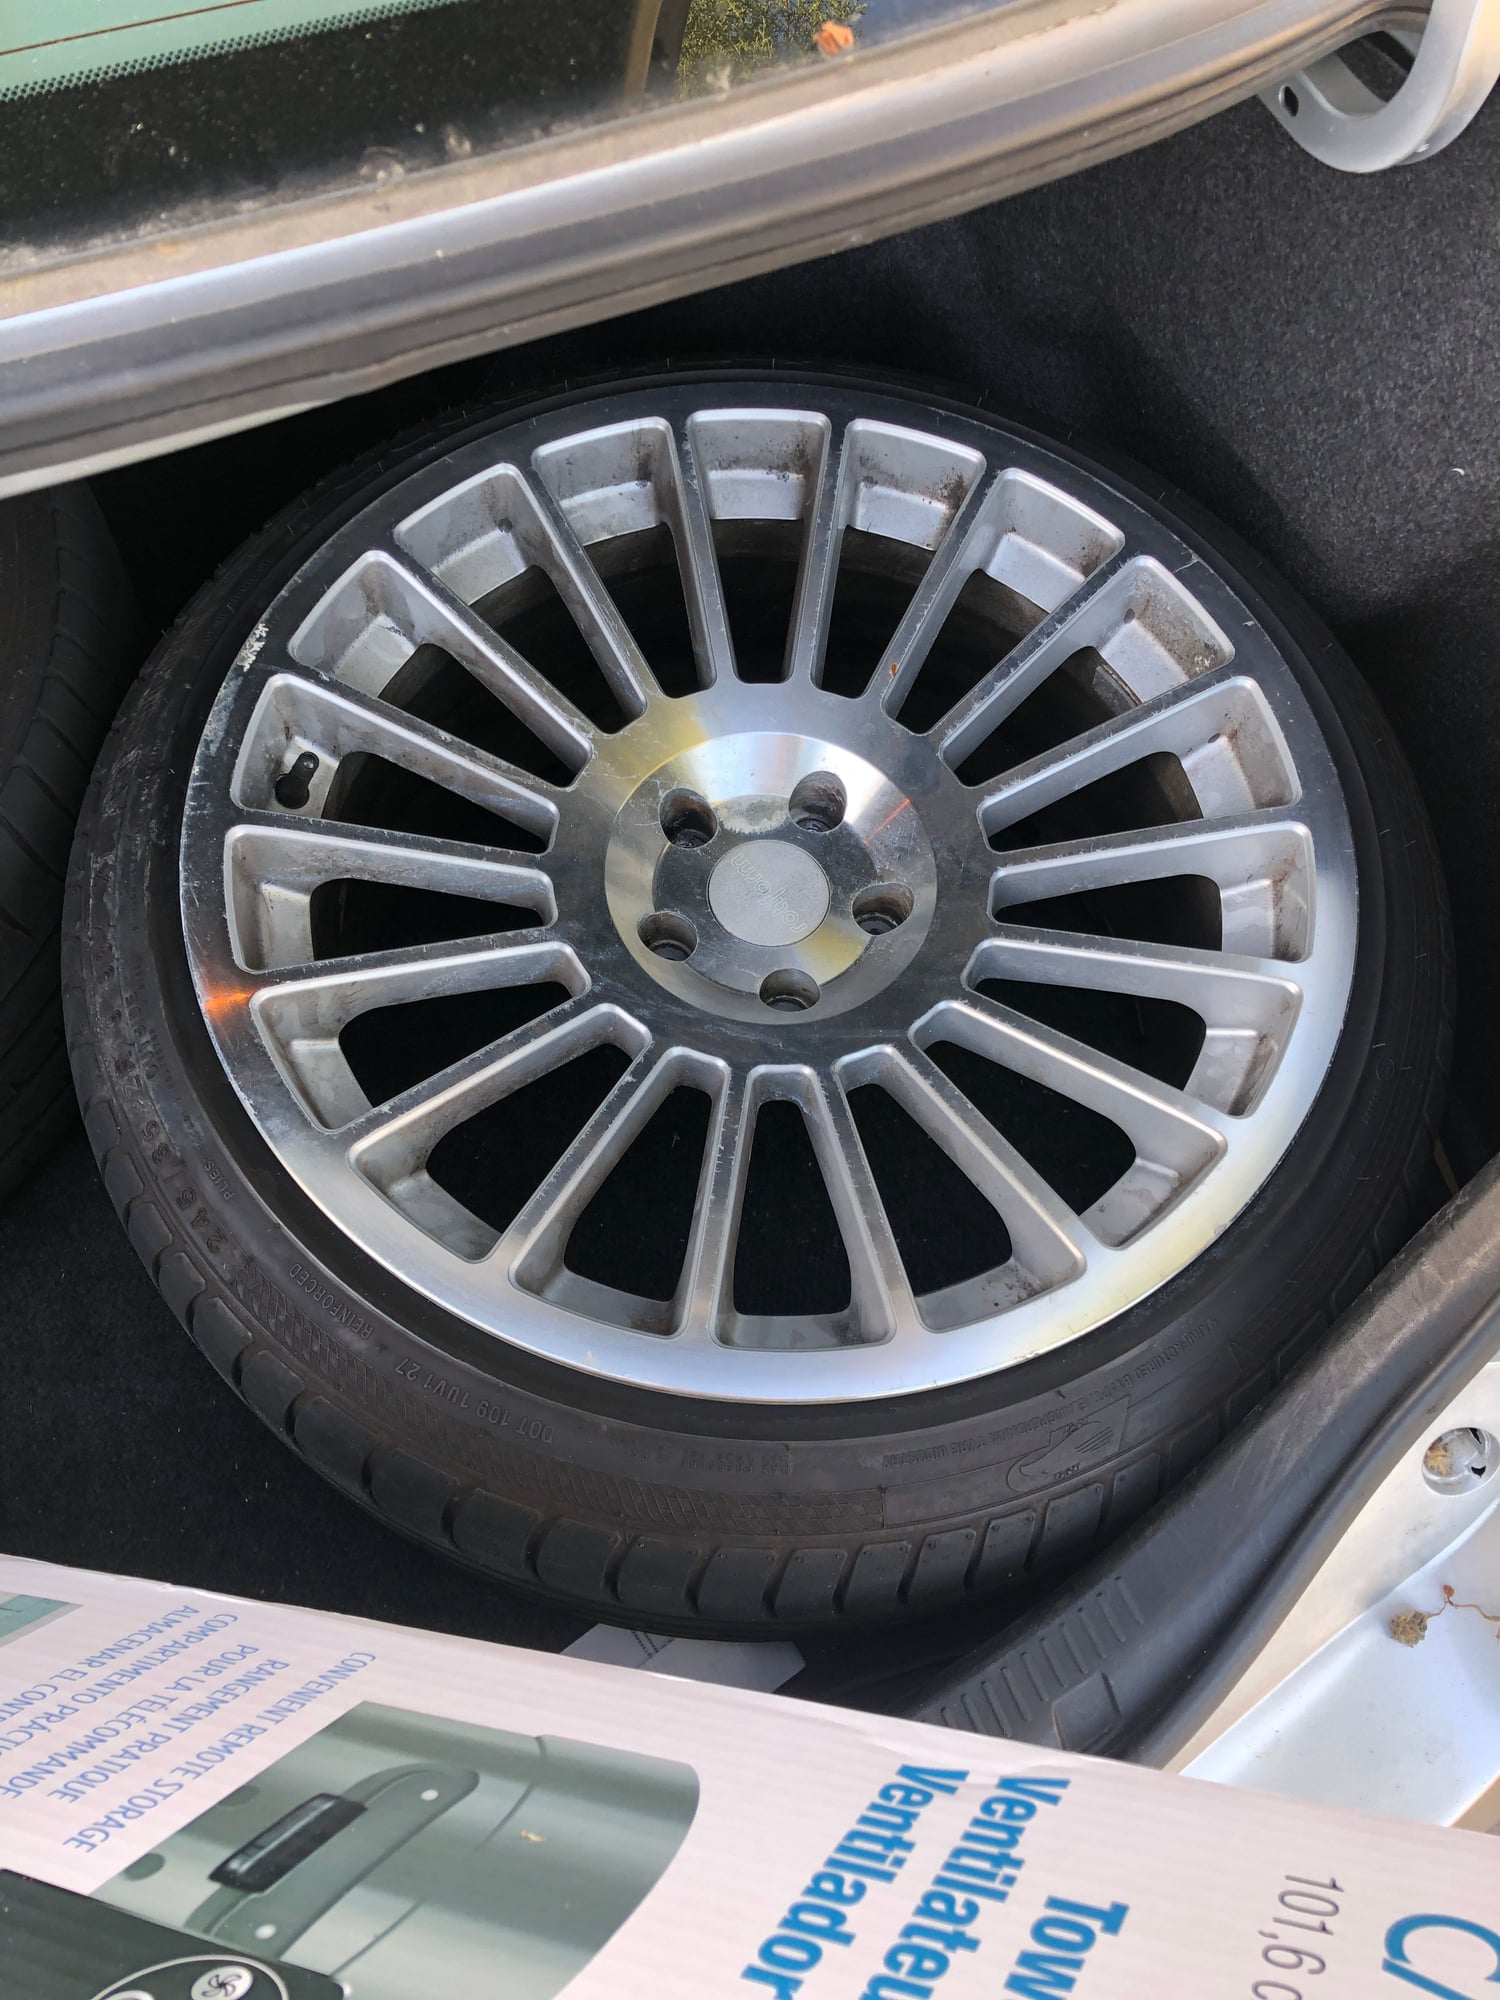 Wheels and Tires/Axles - 19 inch rotiform wheels and tires - Used - Los Angeles, CA 90210, United States